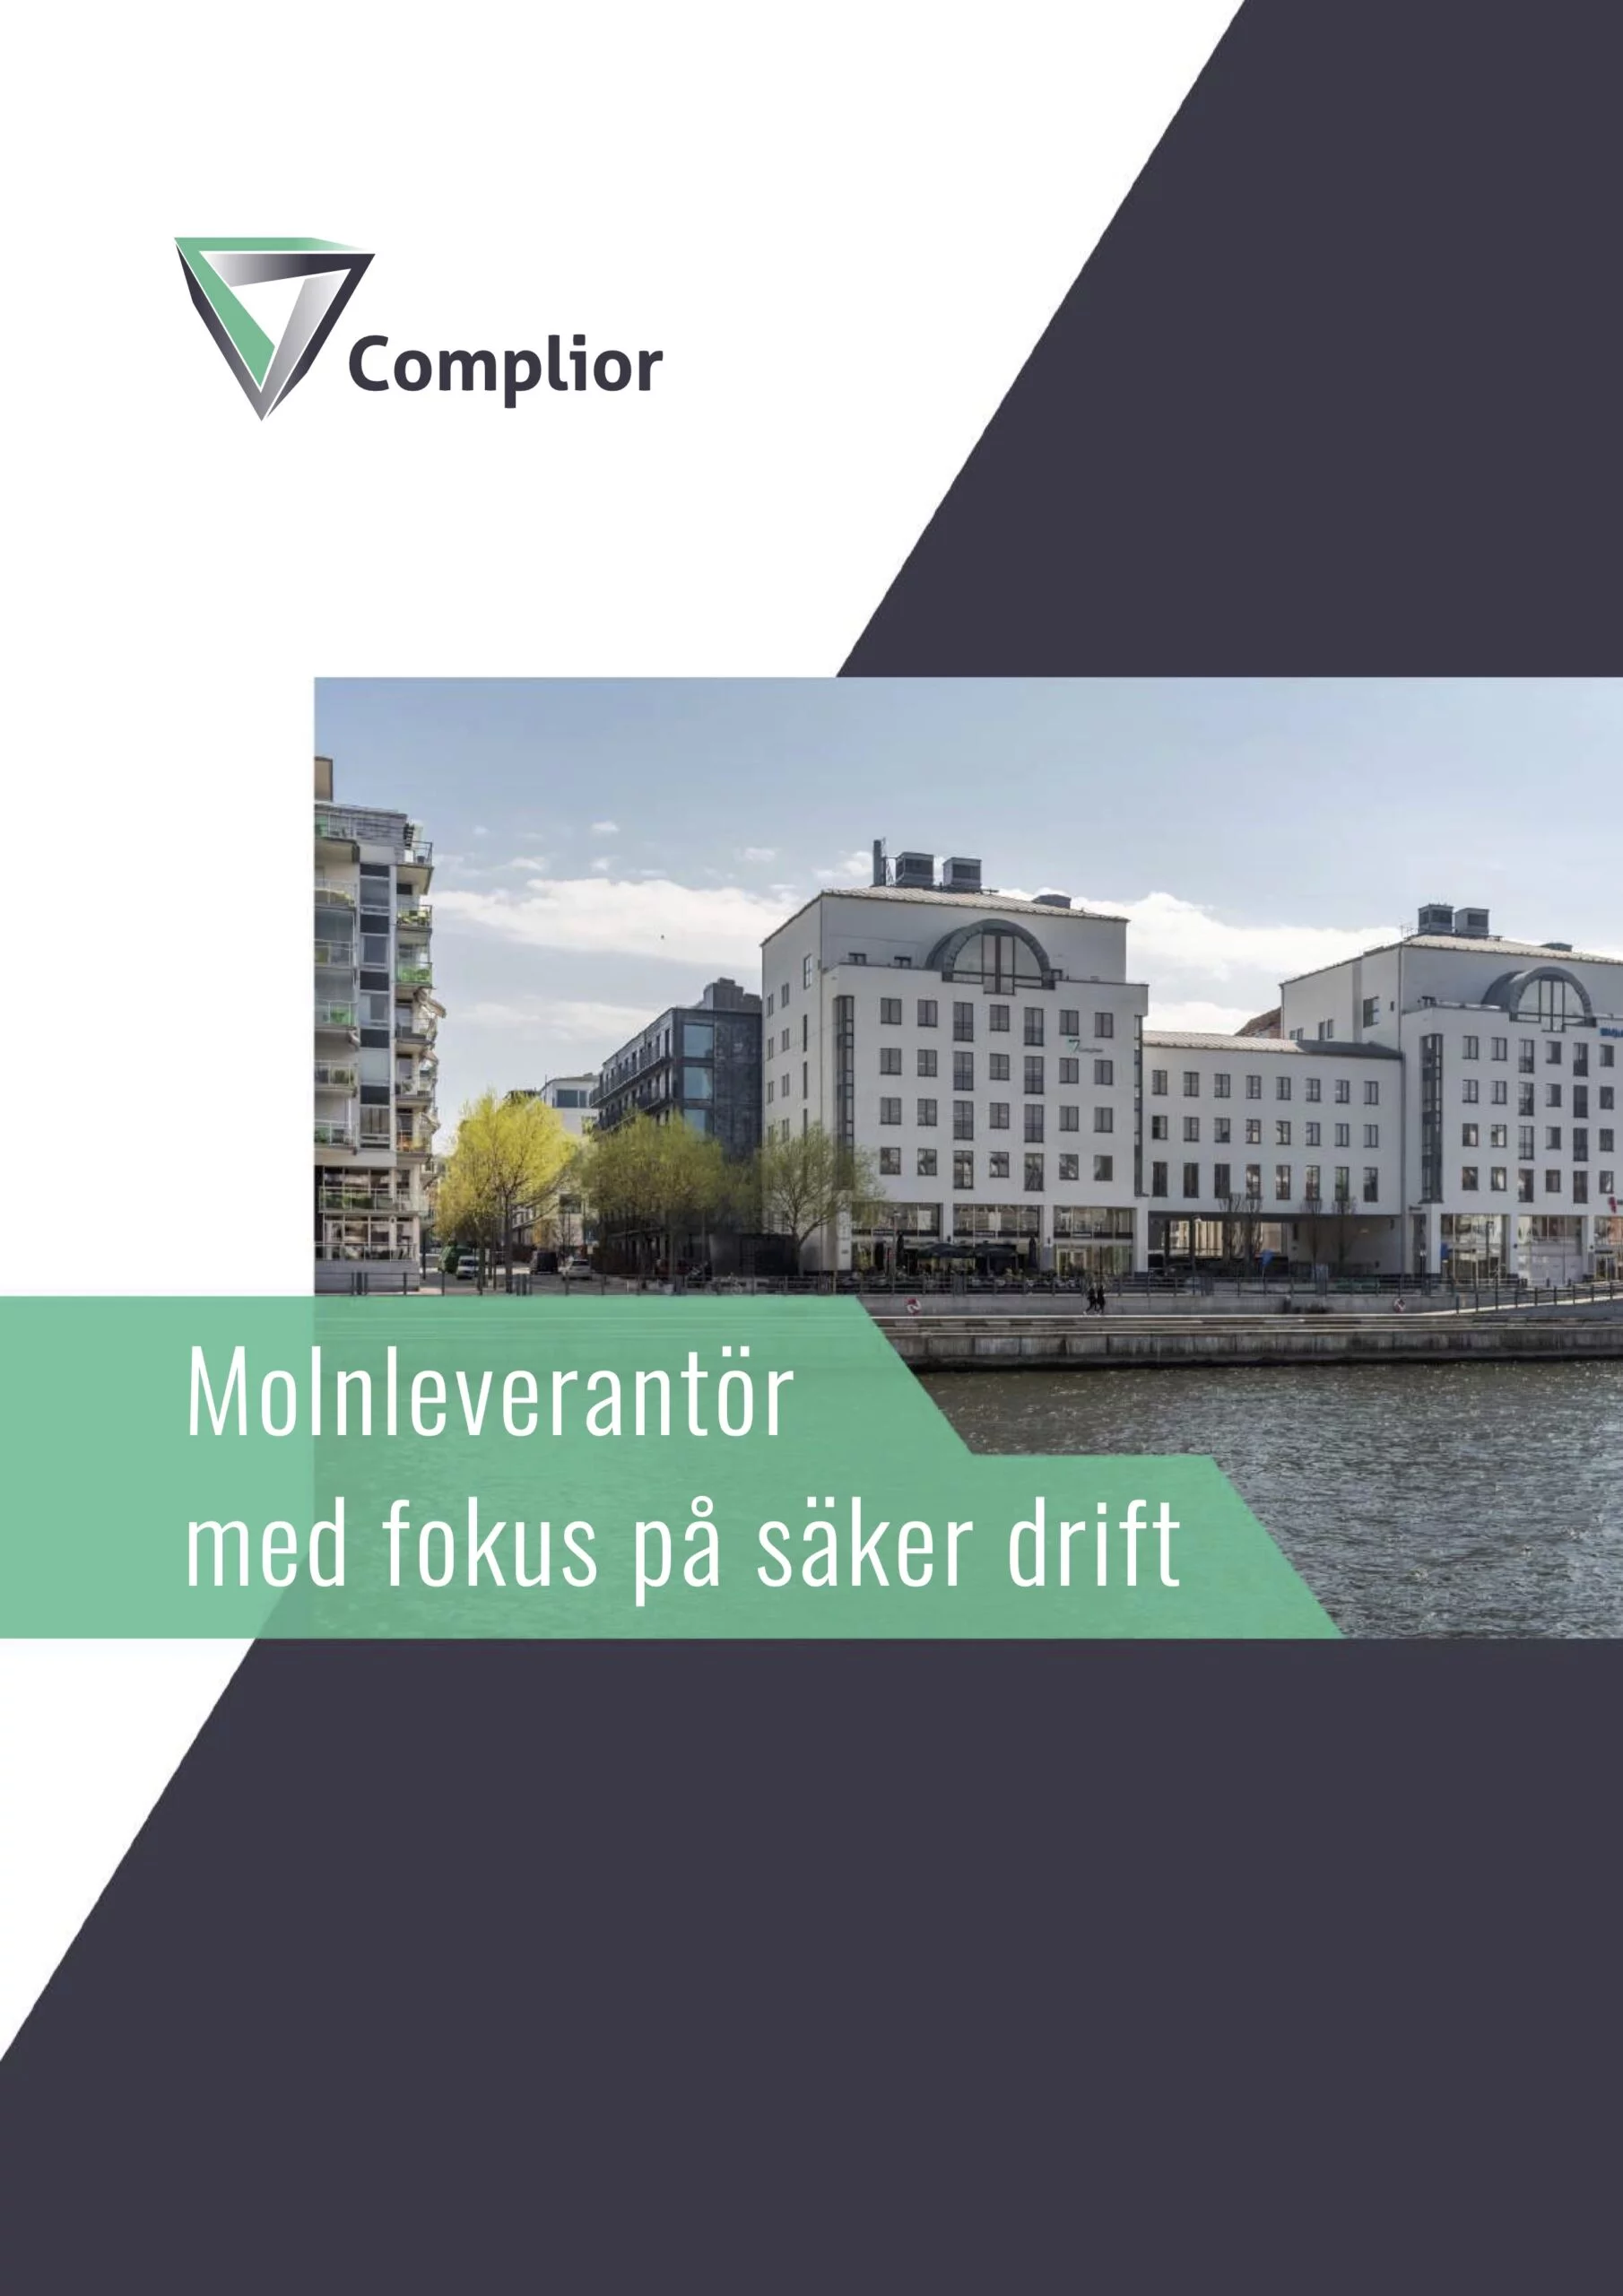 Front page of Complior product guide